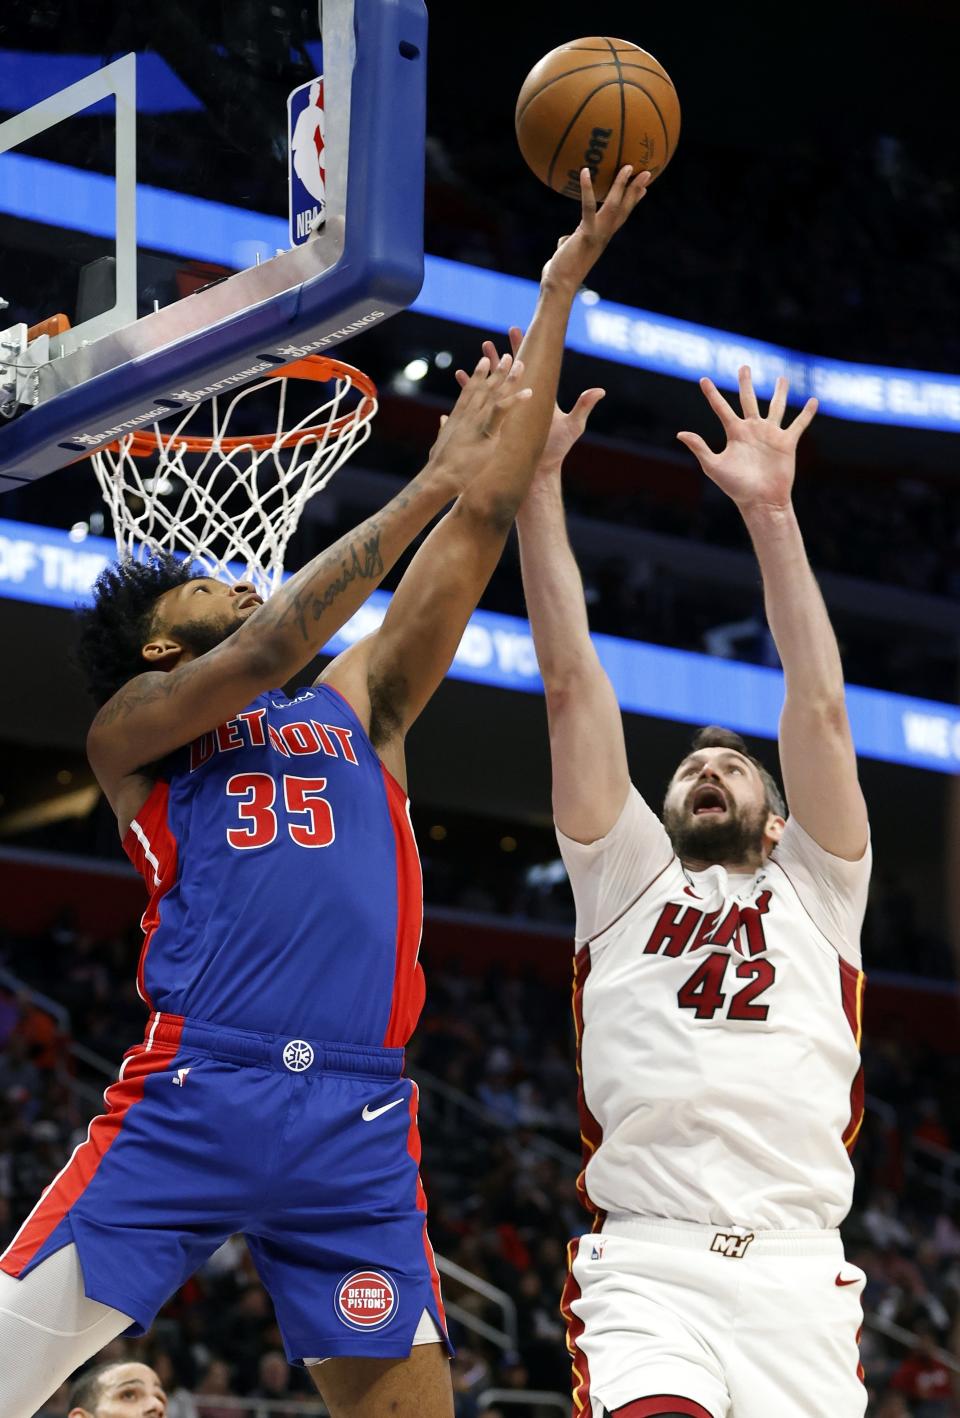 Detroit Pistons forward Marvin Bagley III (35) gets off a shot against Miami Heat forward Kevin Love (42) during the first half of an NBA basketball game, Sunday, March 19, 2023, in Detroit. (AP Photo/Duane Burleson)